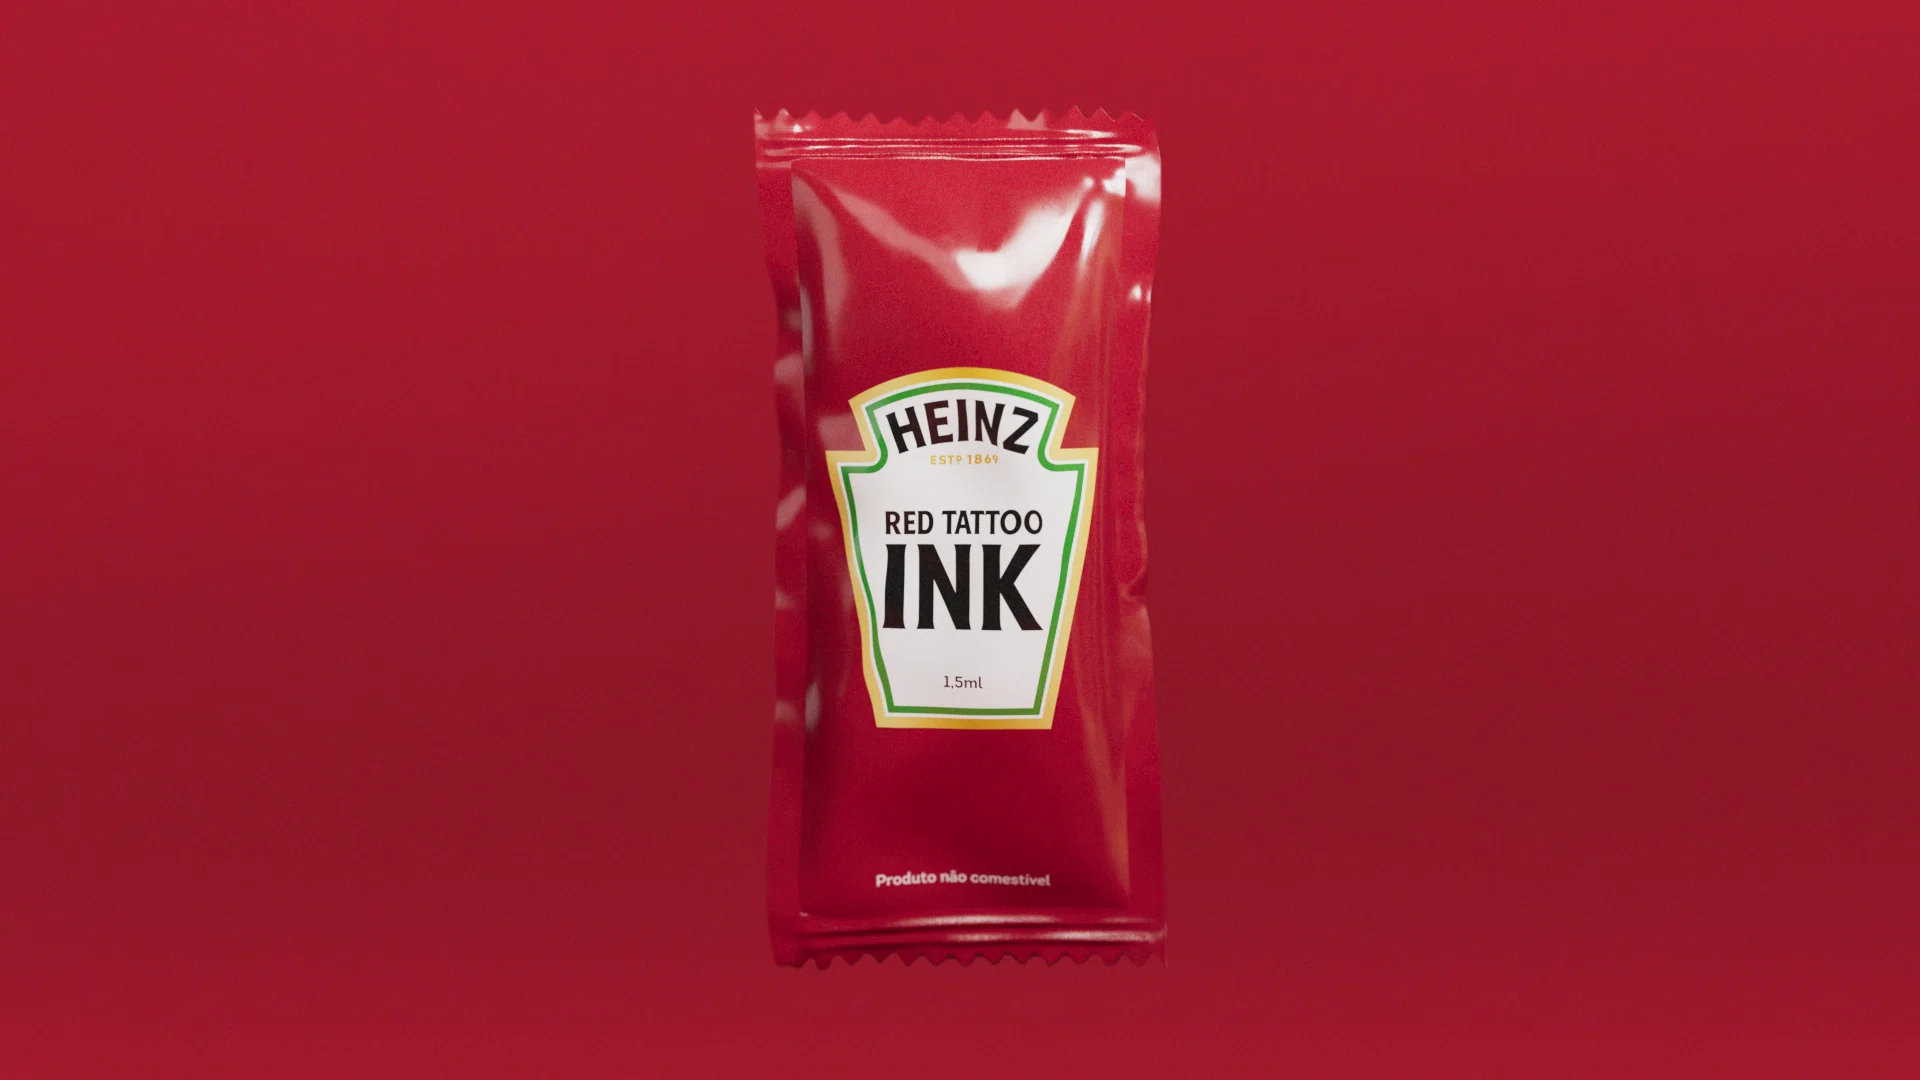 Heinz is developing a red tattoo pigment in its official Pantone shade